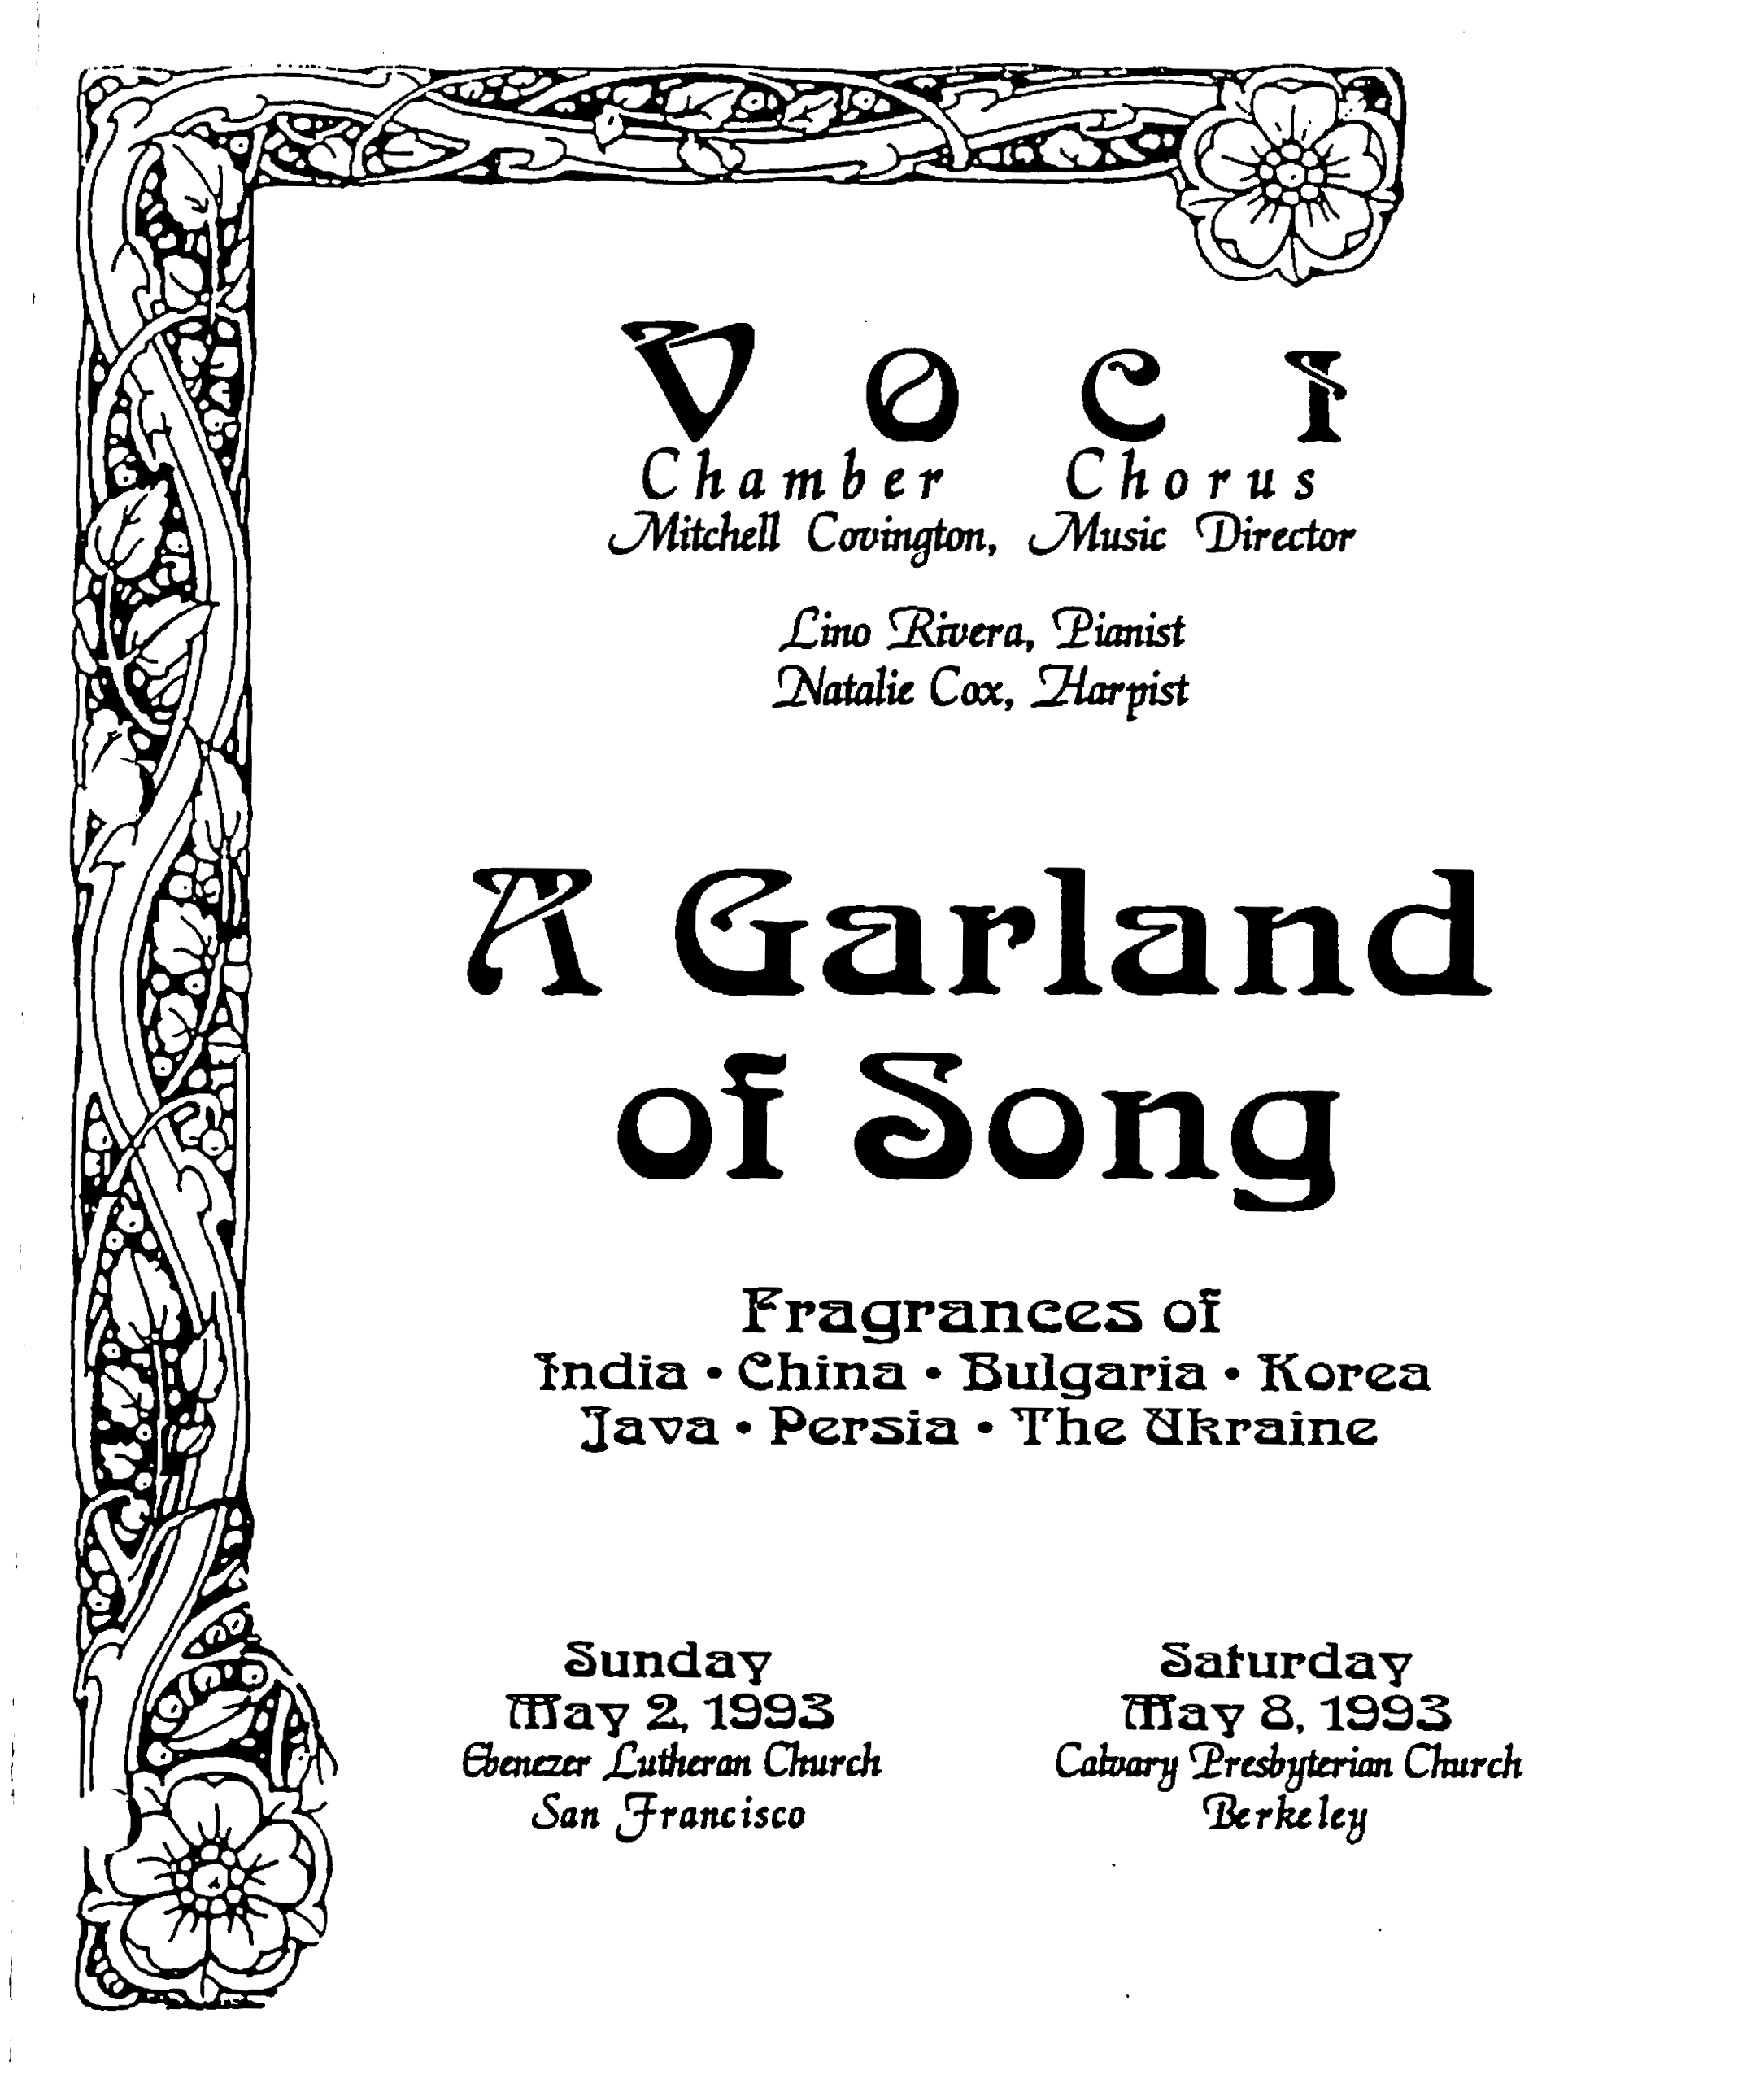 A Garland of Song